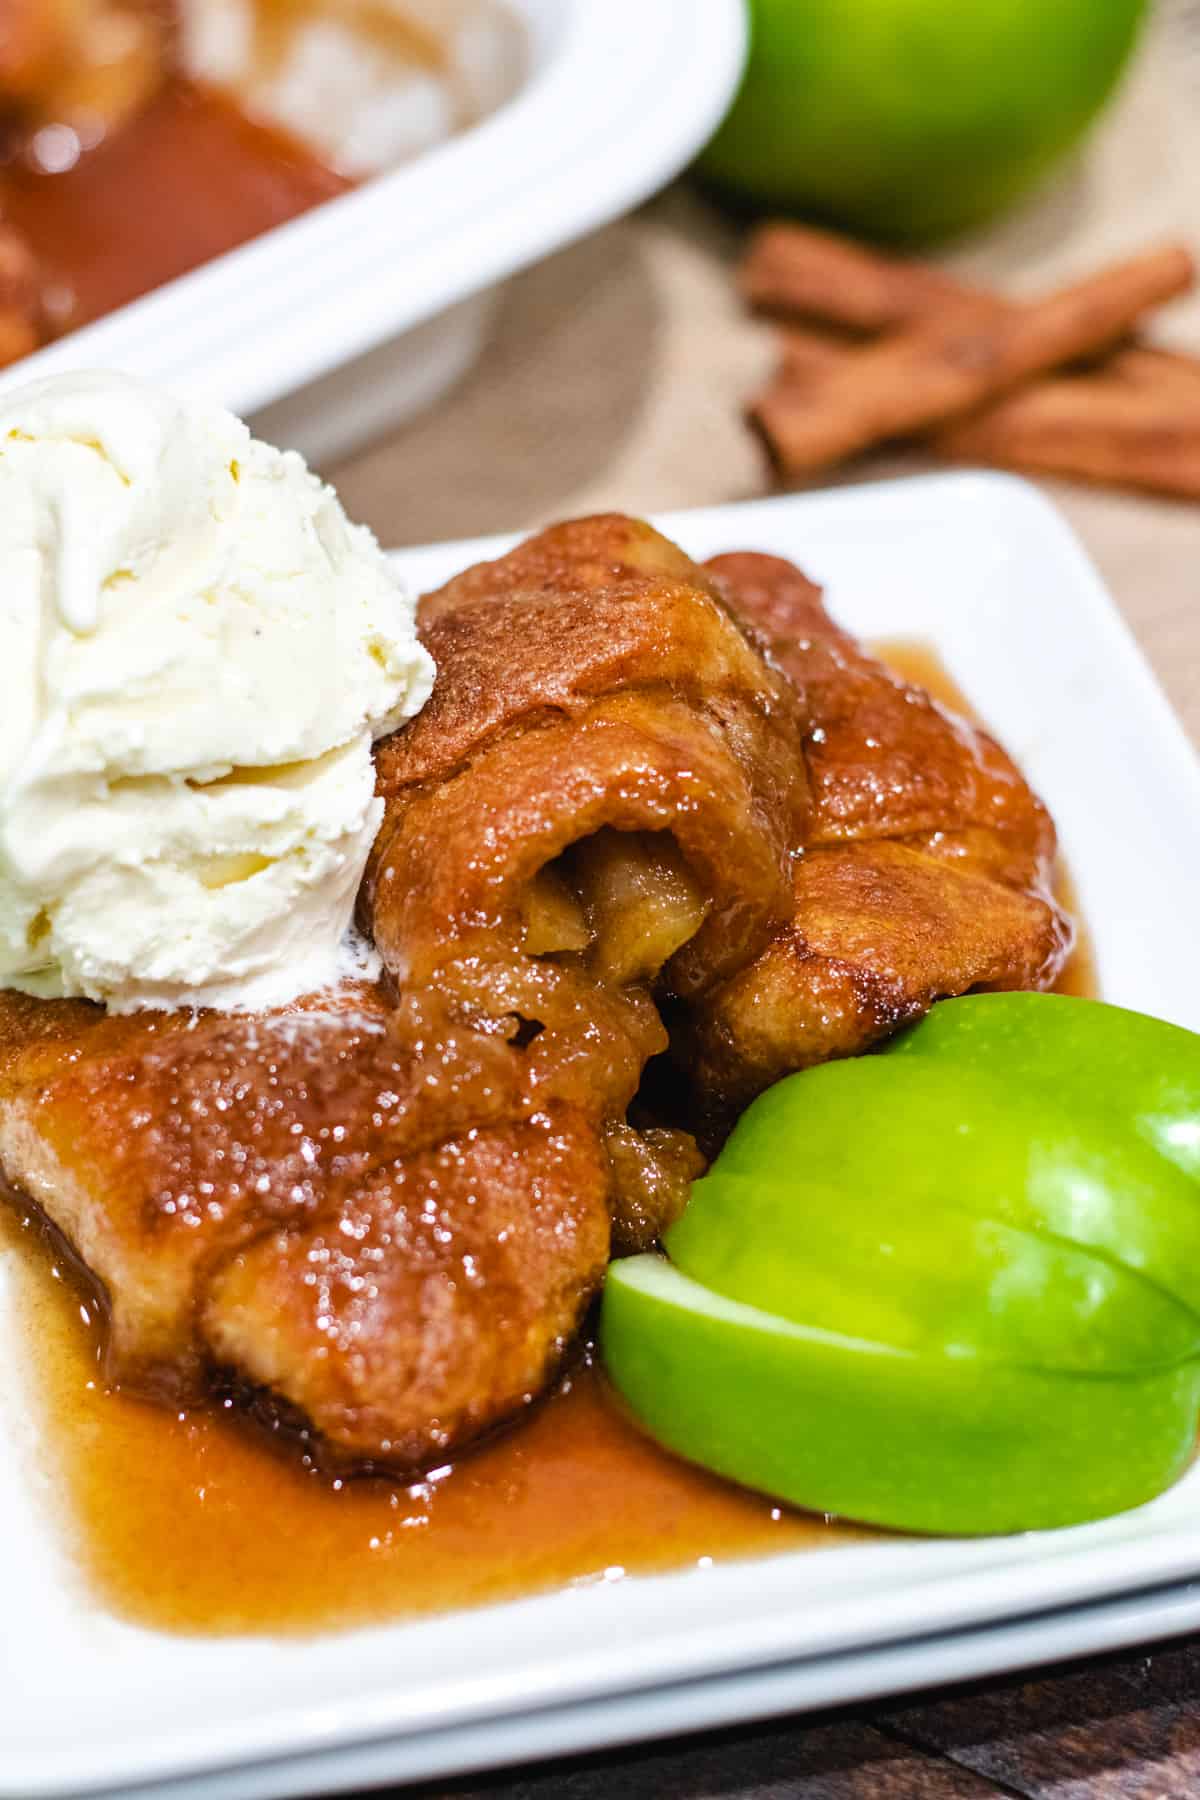 An upclose image of a plate full of easy apple dumplings with ice cream on top.